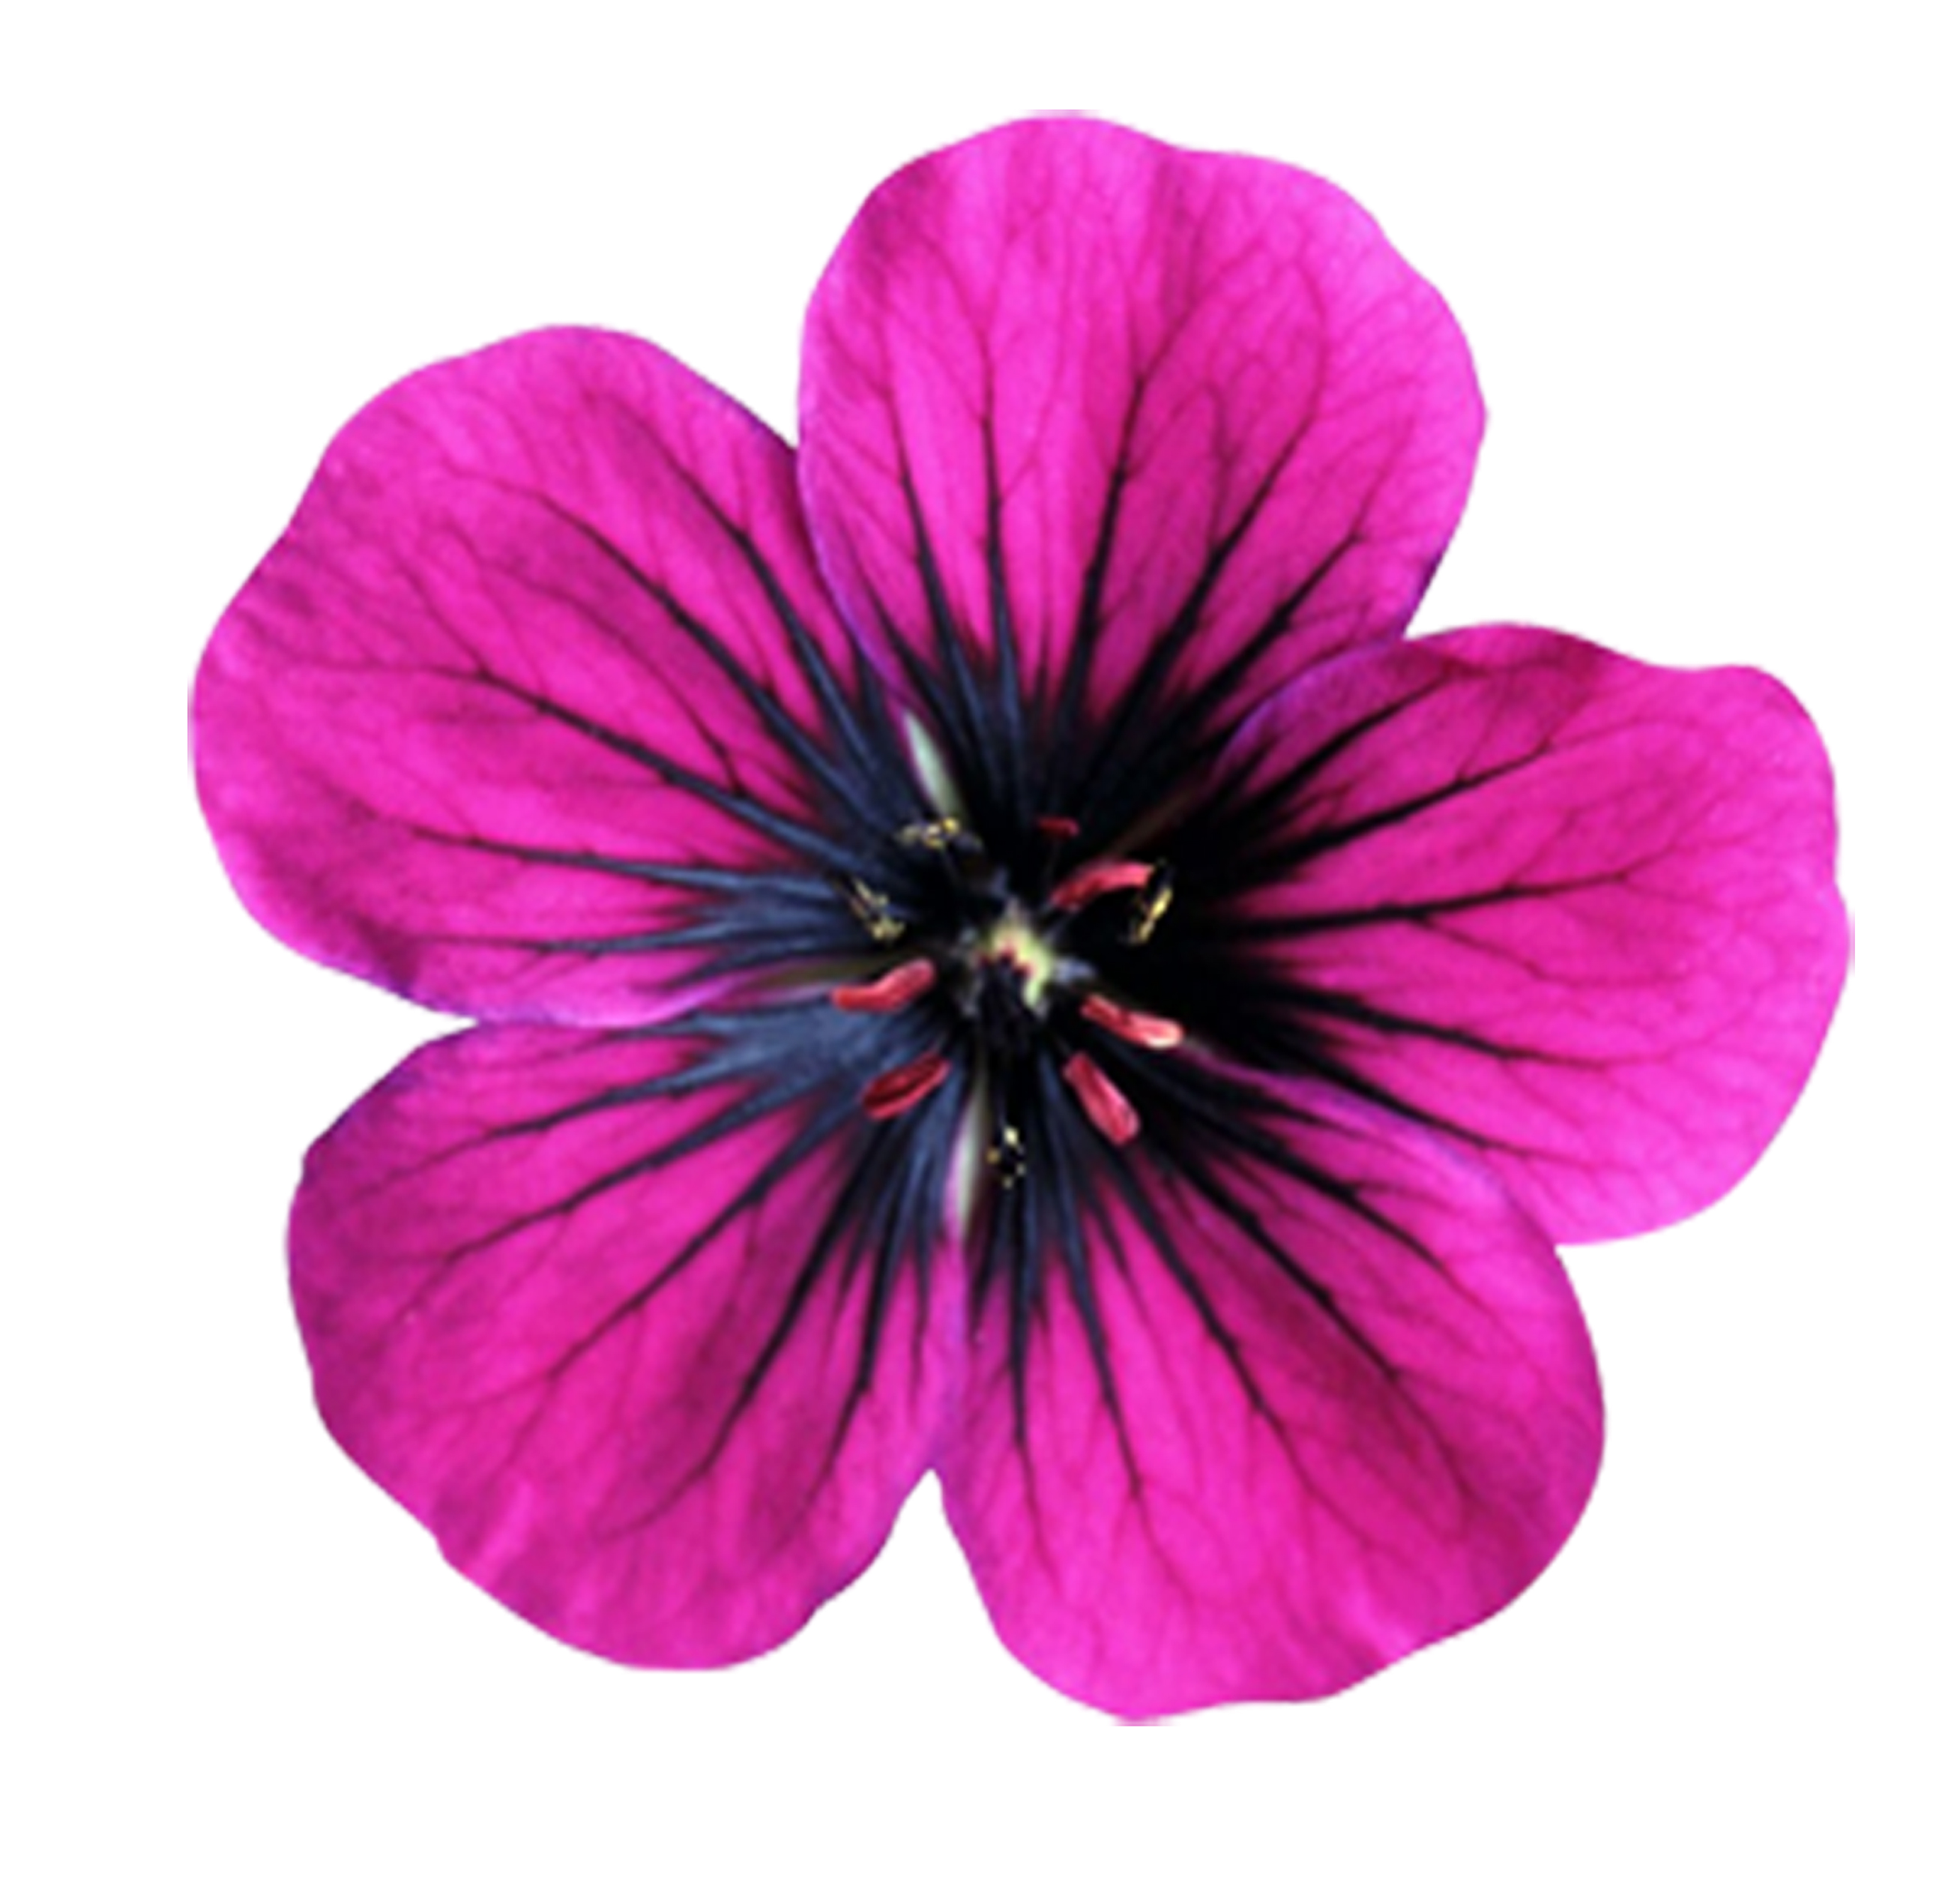 Pink Flower To Vector Free Images at vector clip art